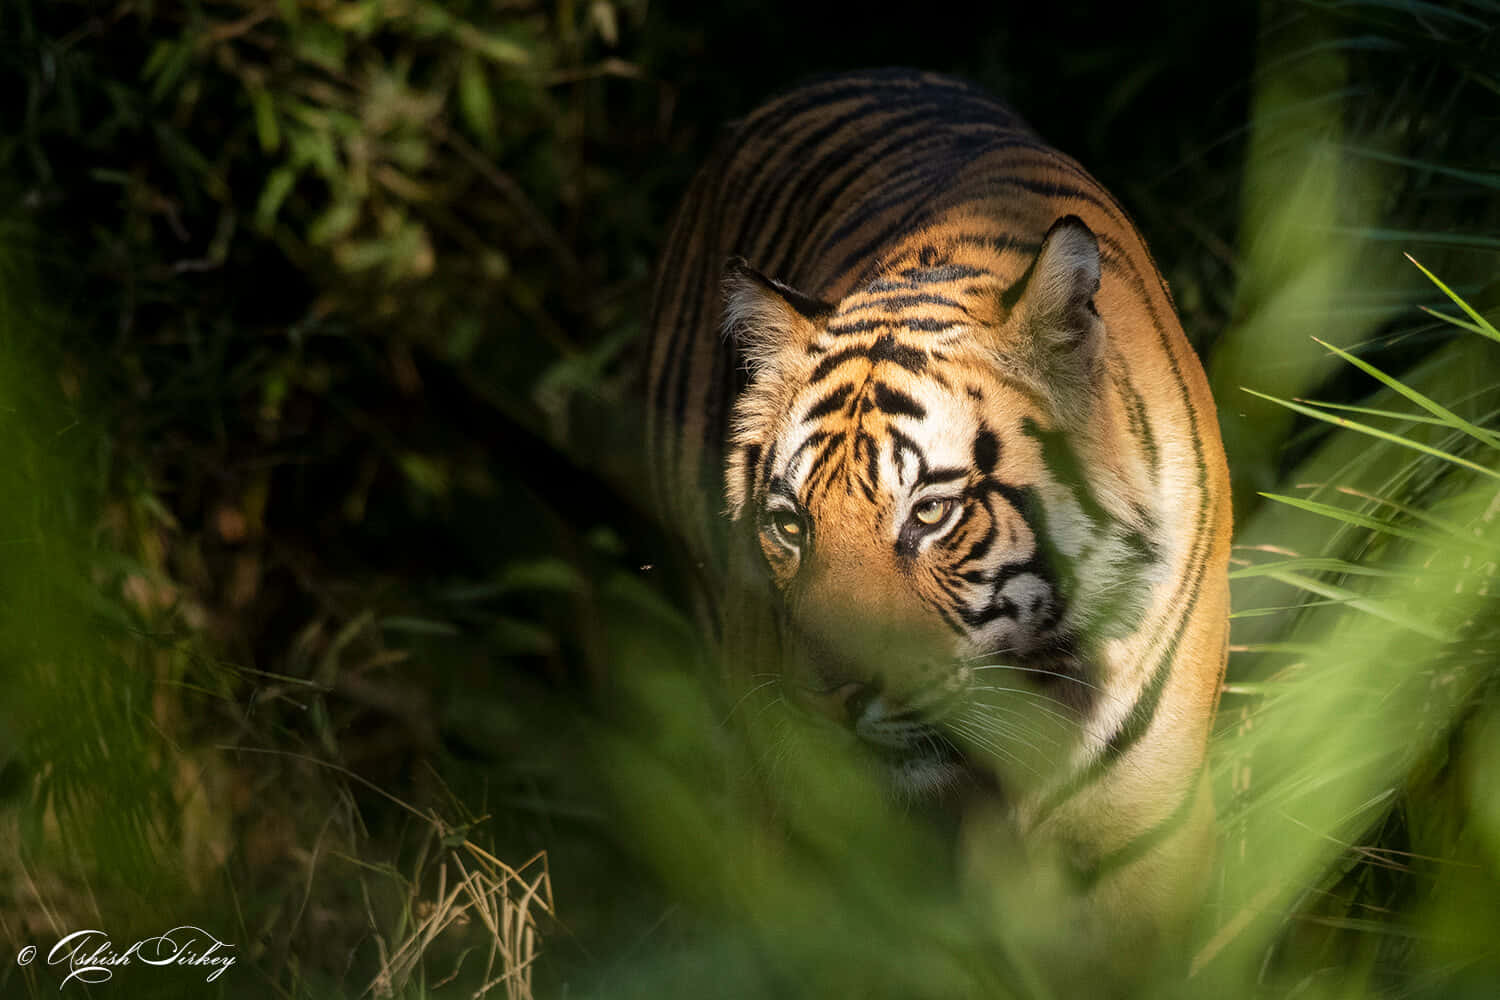 A beautiful Bengal Tiger taking an afternoon stroll